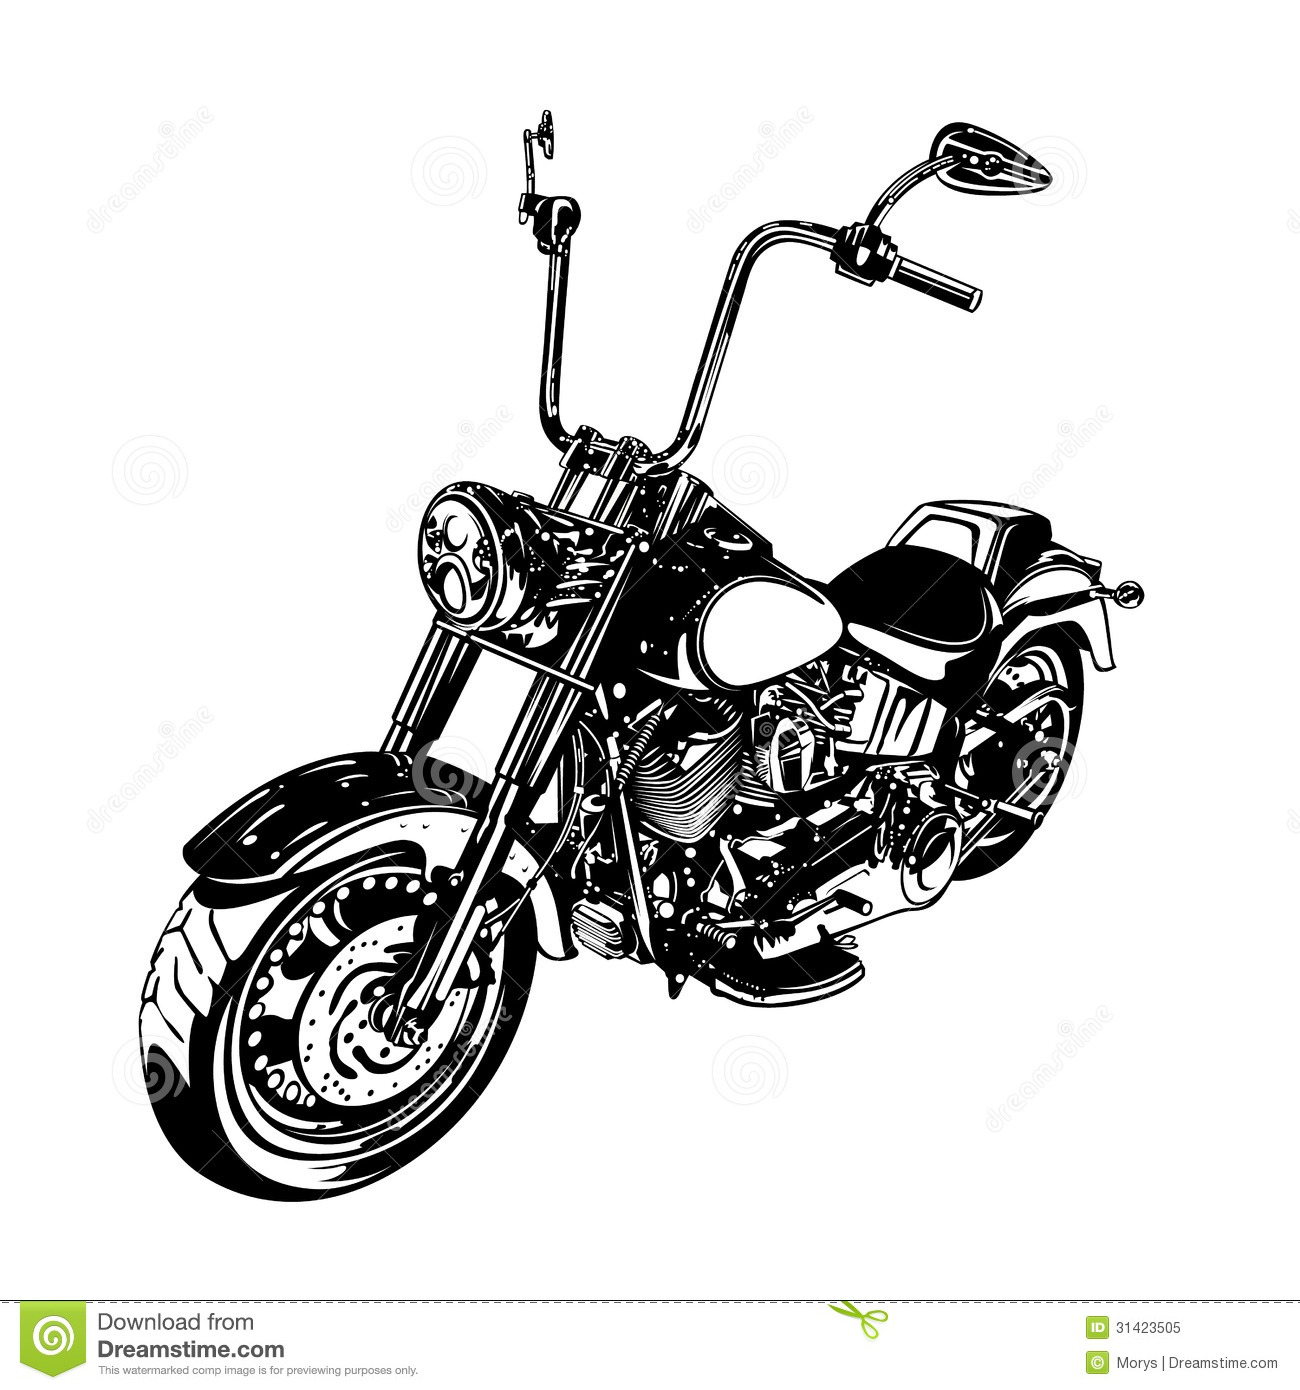 Black and White Chopper Motorcycle Art